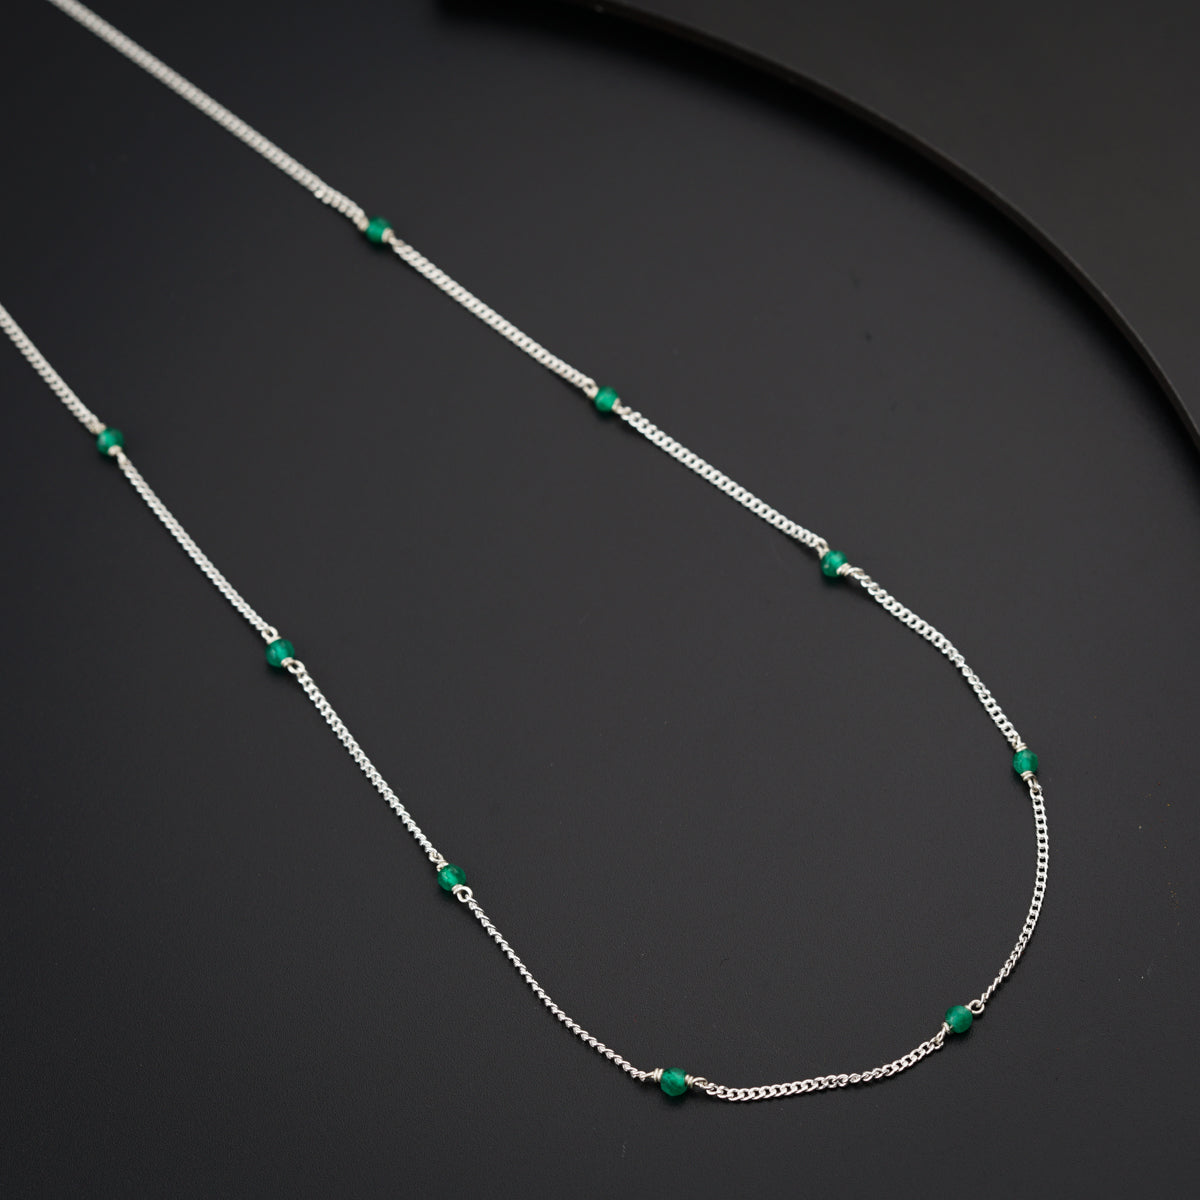 a silver necklace with green beads on a black surface